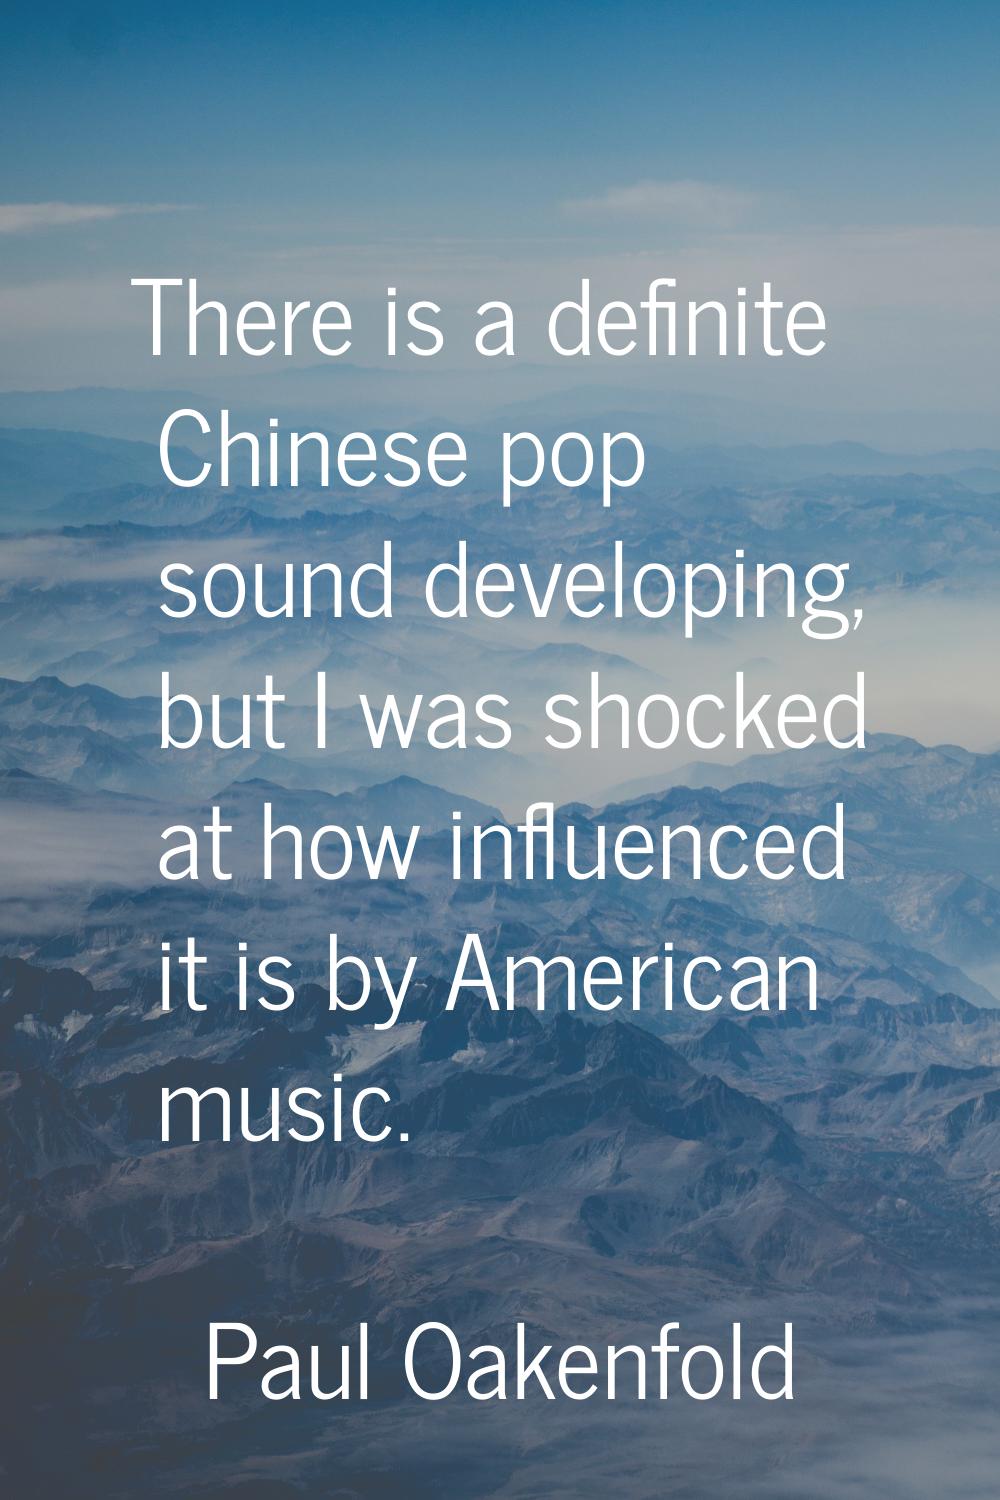 There is a definite Chinese pop sound developing, but I was shocked at how influenced it is by Amer